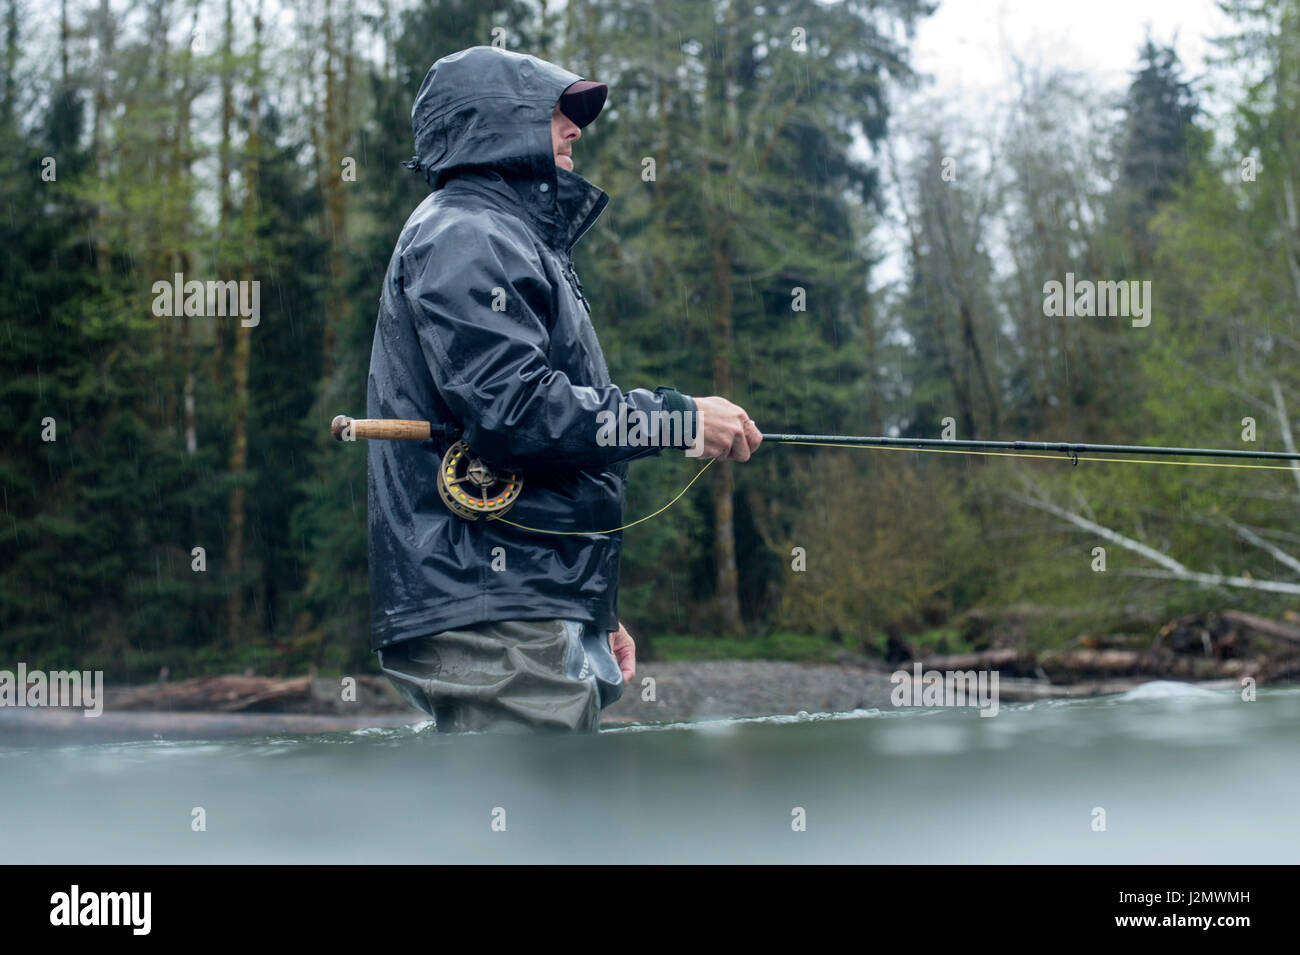 Angler Fly Fishing for Steelhead on the Queets River, Olympic Peninsula, Washington Stock Photo